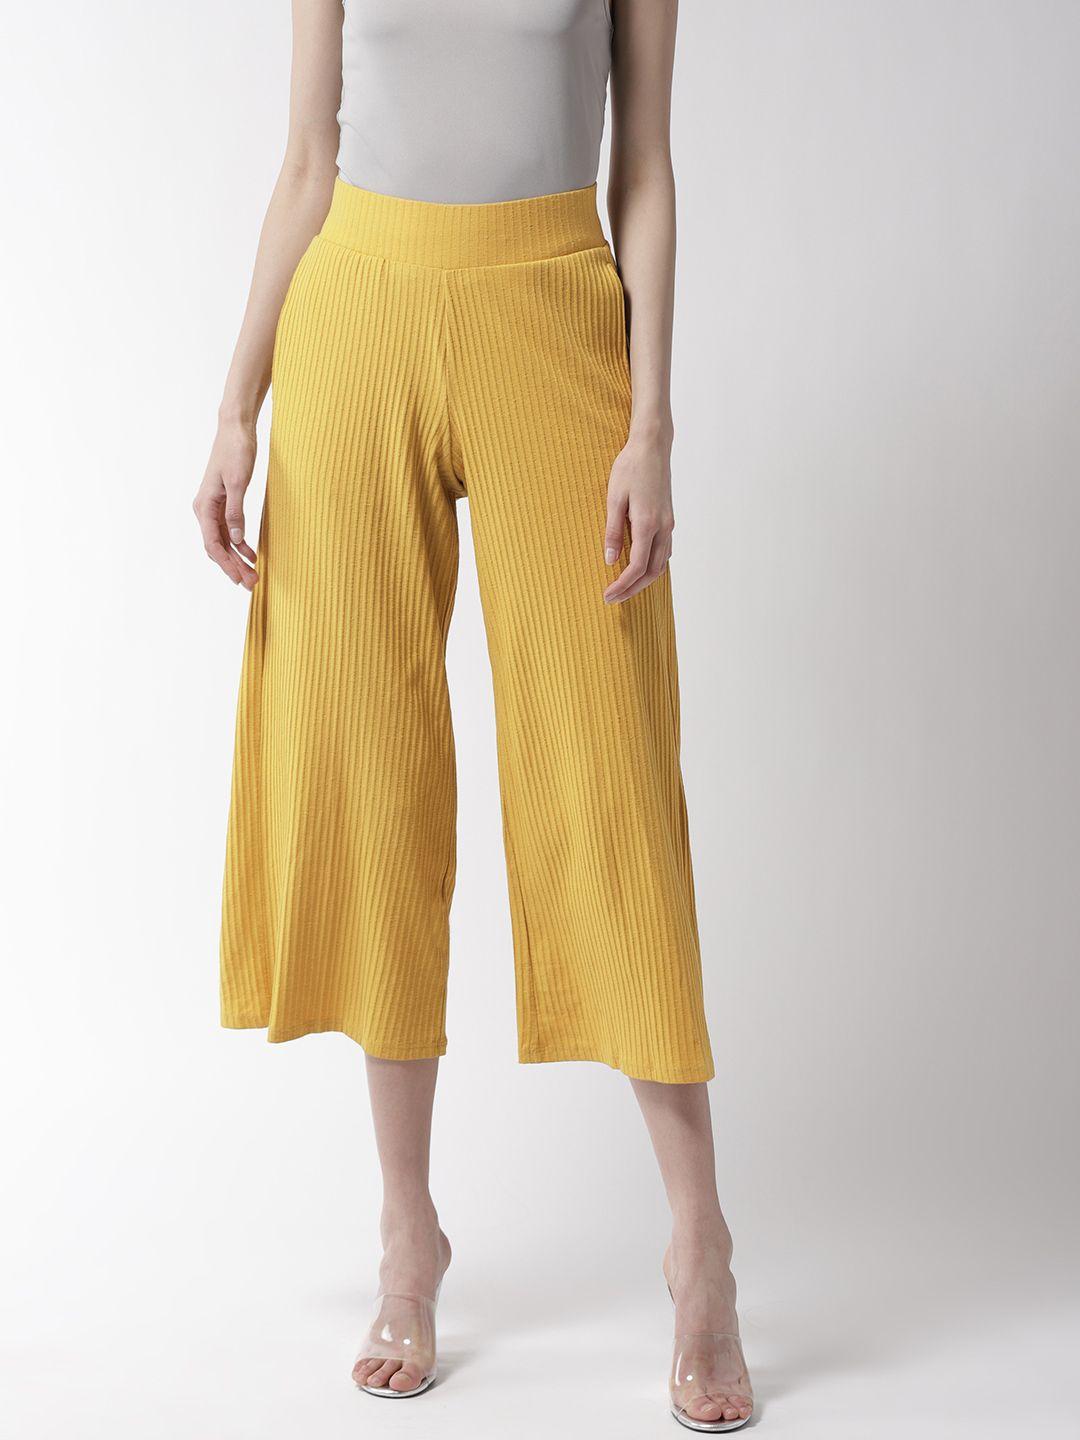 marks & spencer women mustard yellow self-striped culottes